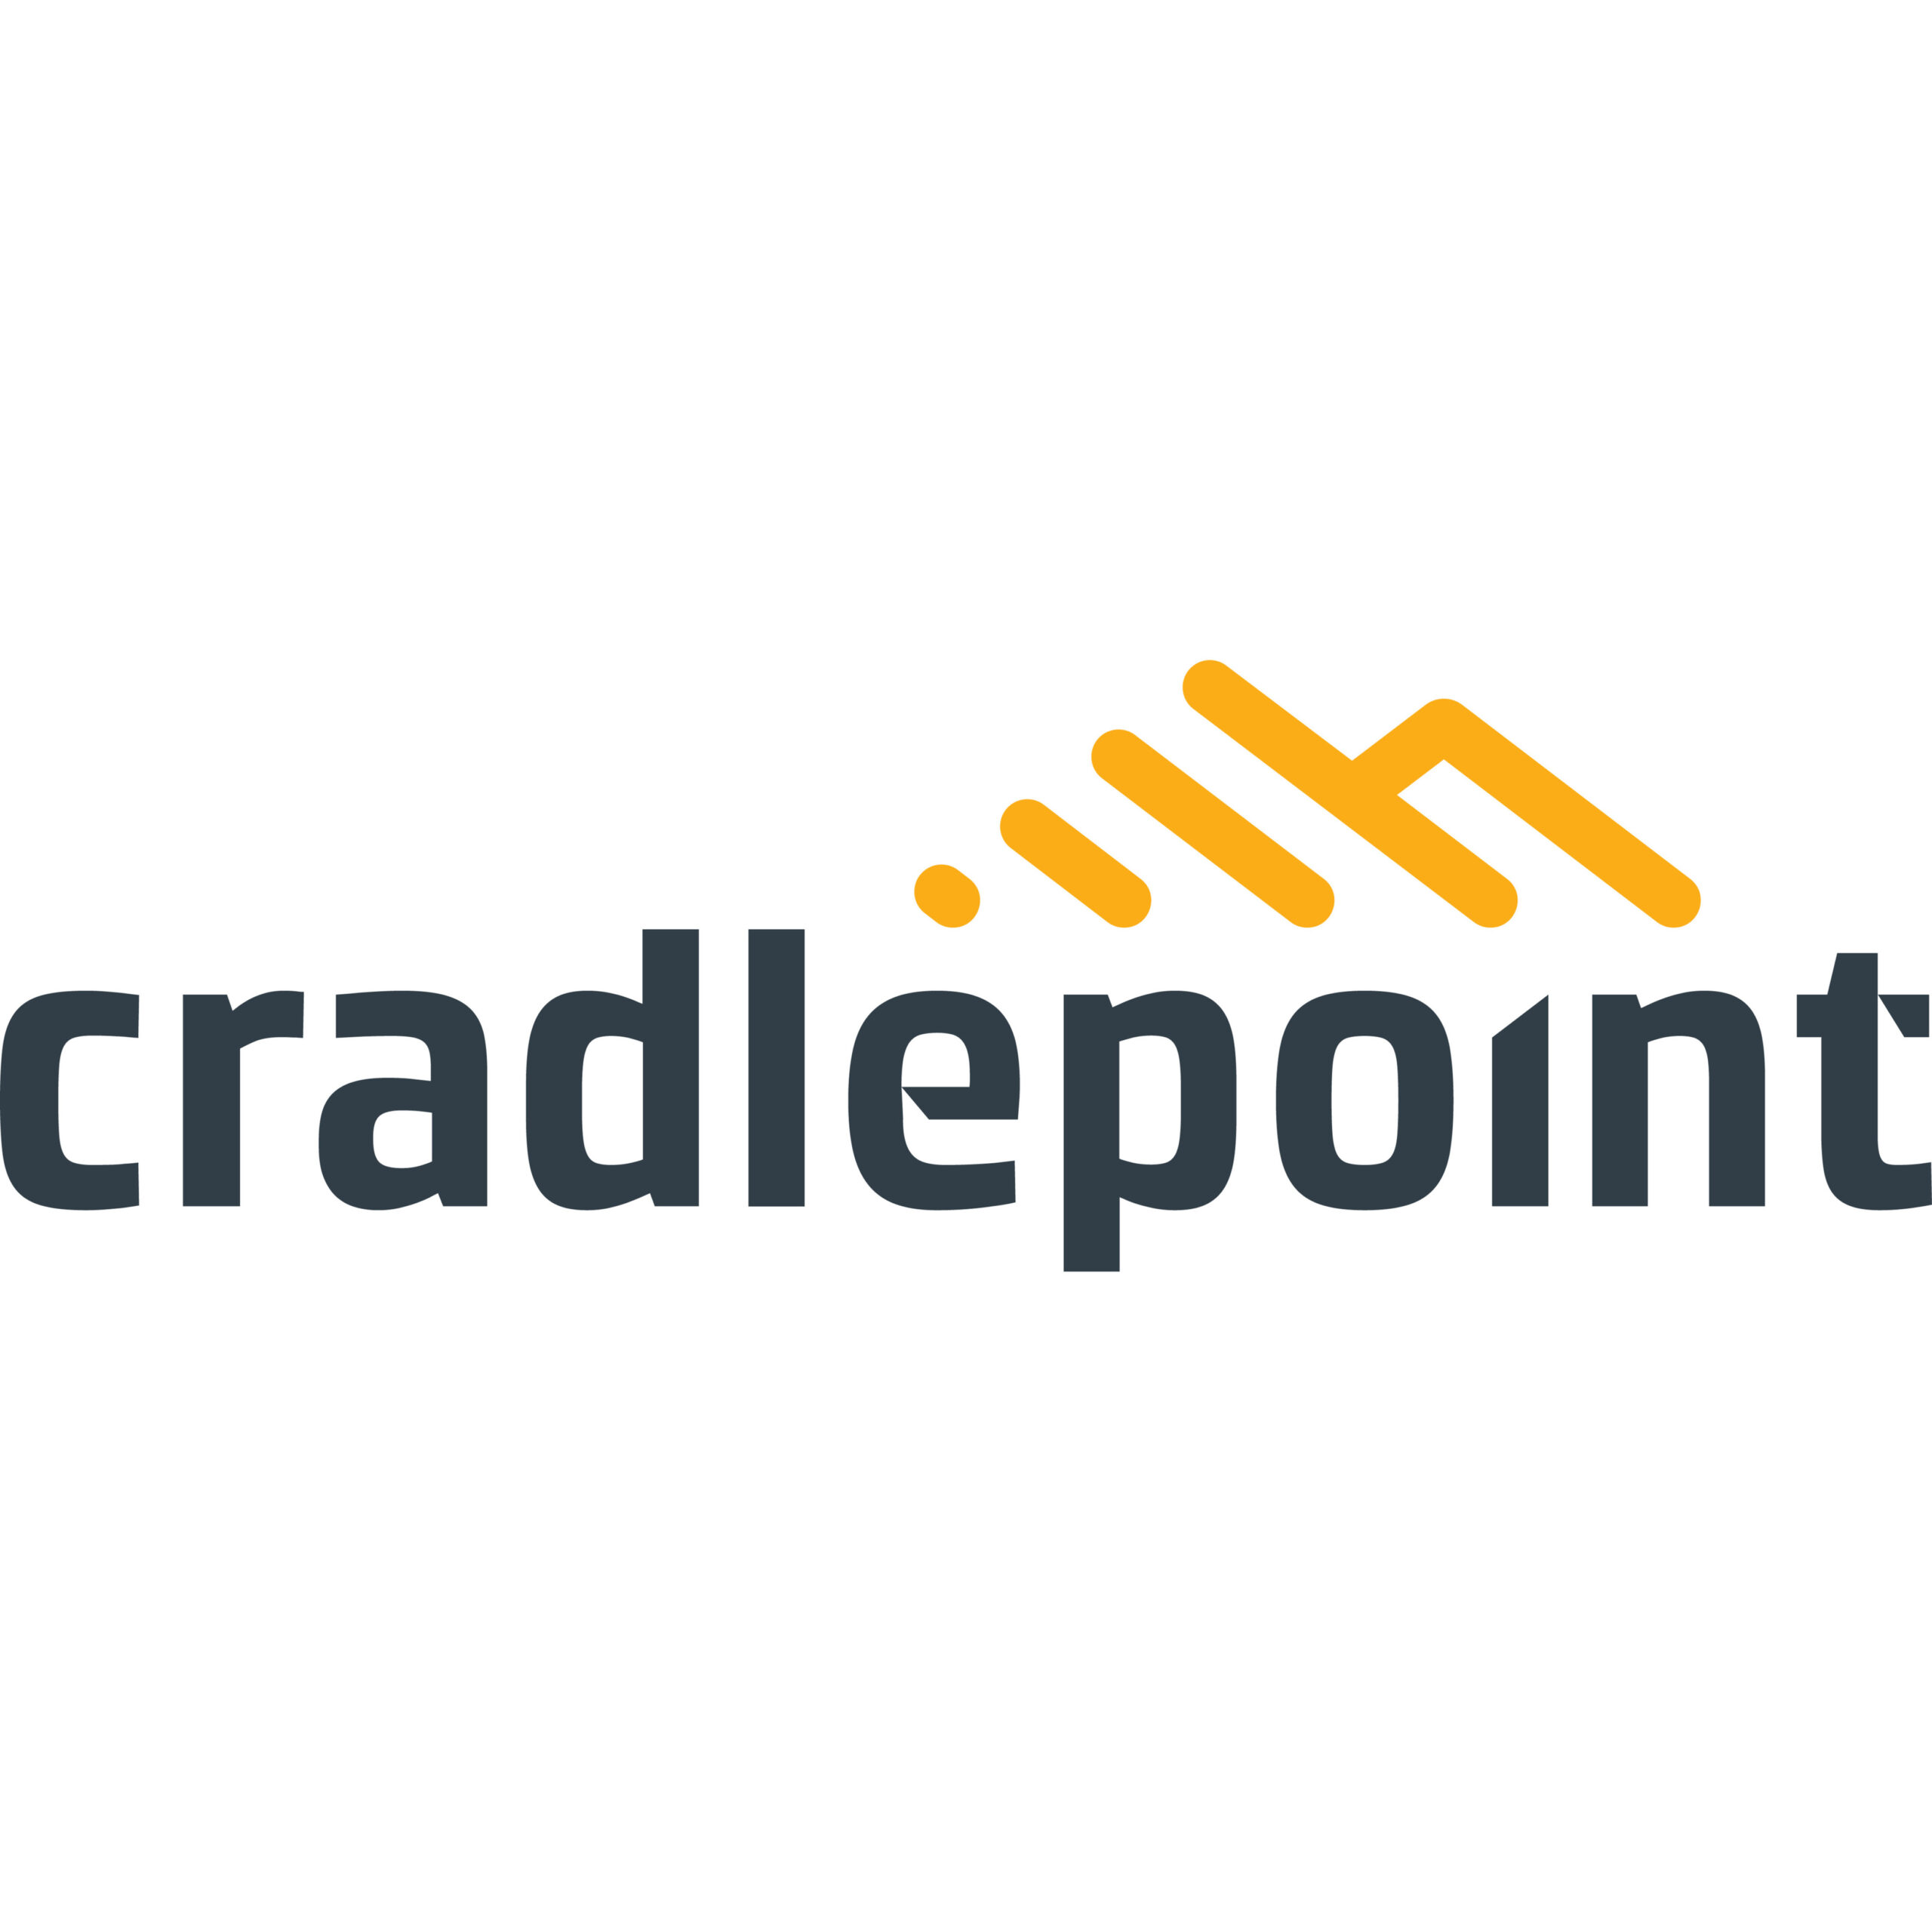 CradlePoint (170725-000) Wireless Router 170725-000